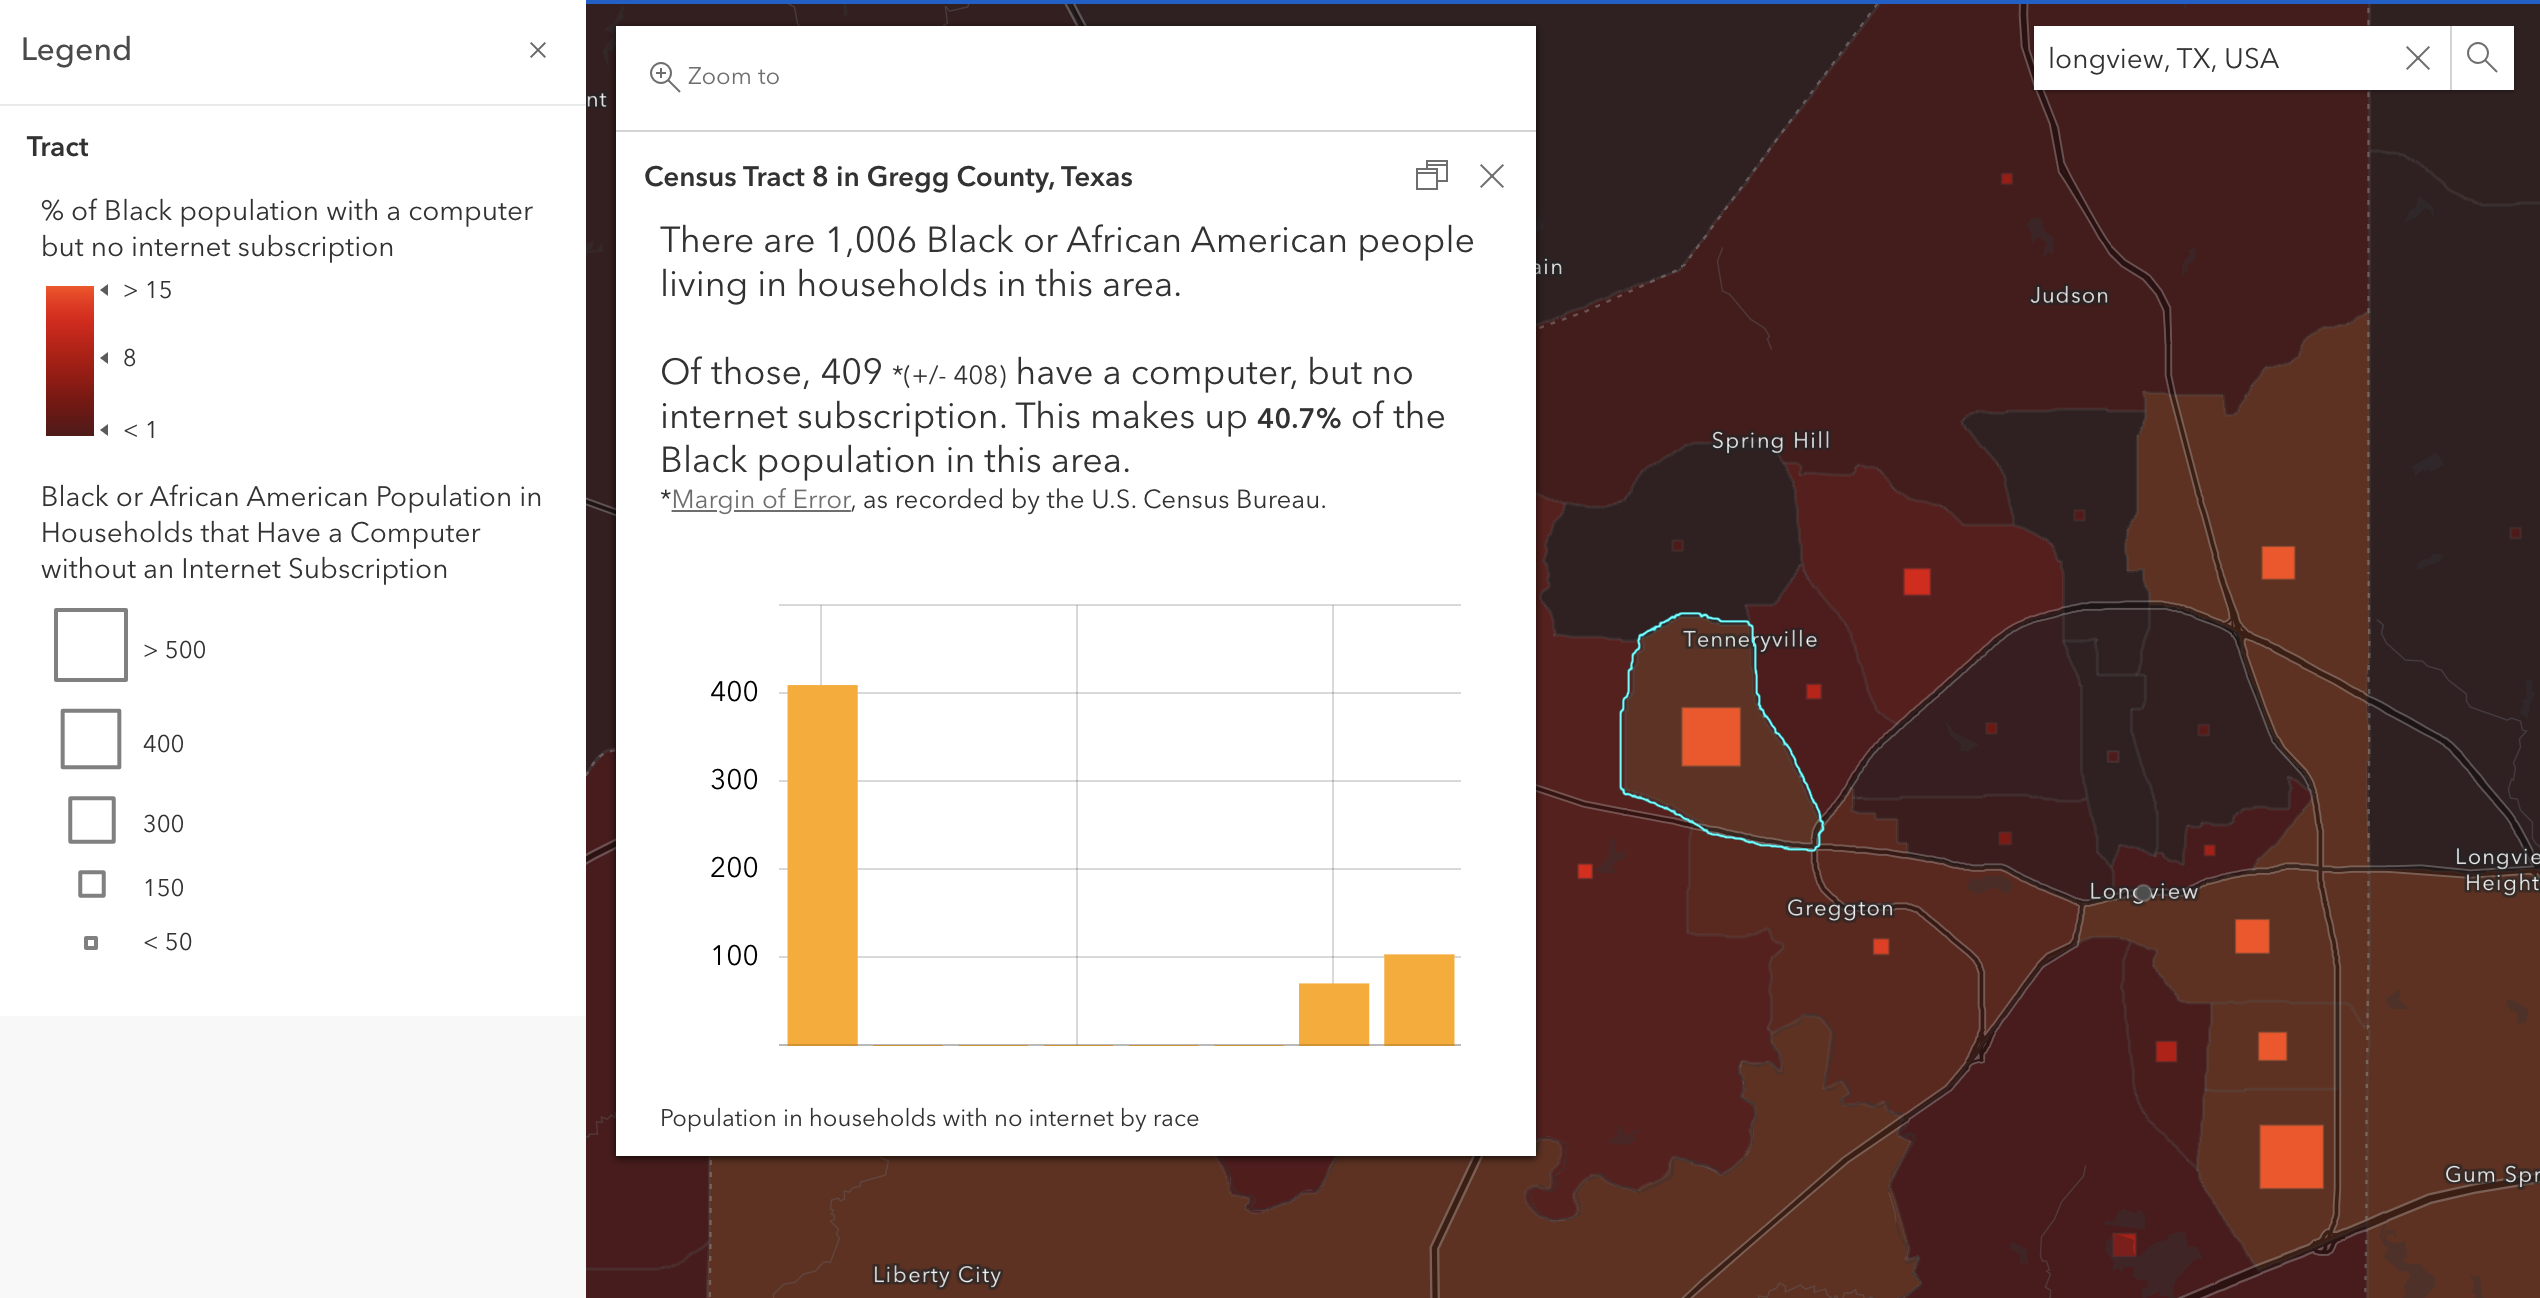 Black residents of Tenneryville, TX do not have internet access